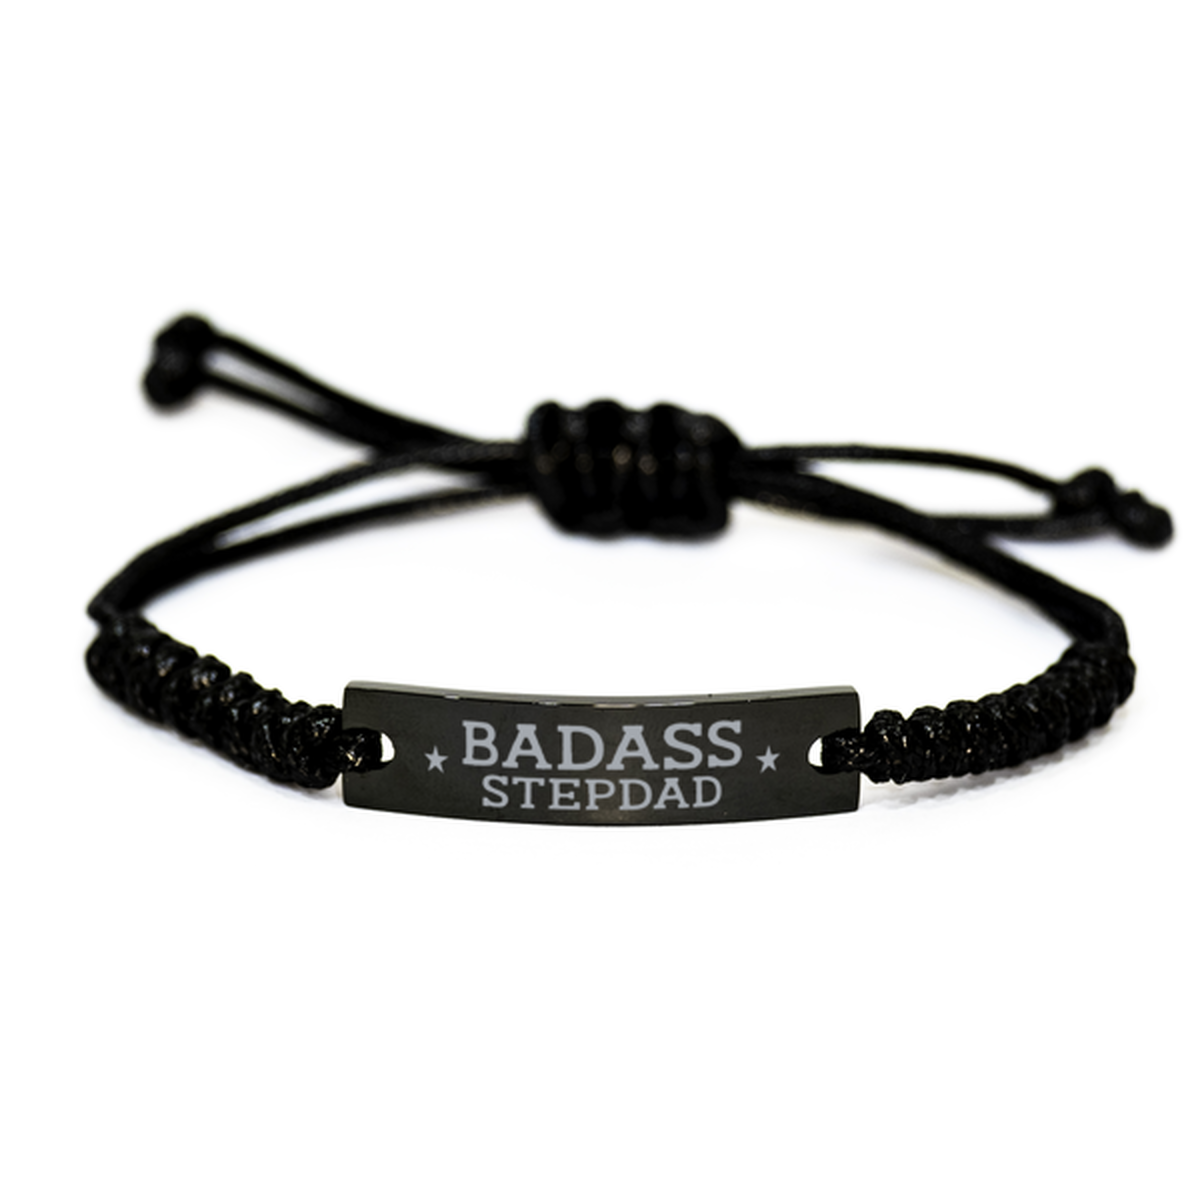 Stepdad Rope Bracelet, Badass Stepdad, Funny Family Gifts For Stepdad From Son Daughter